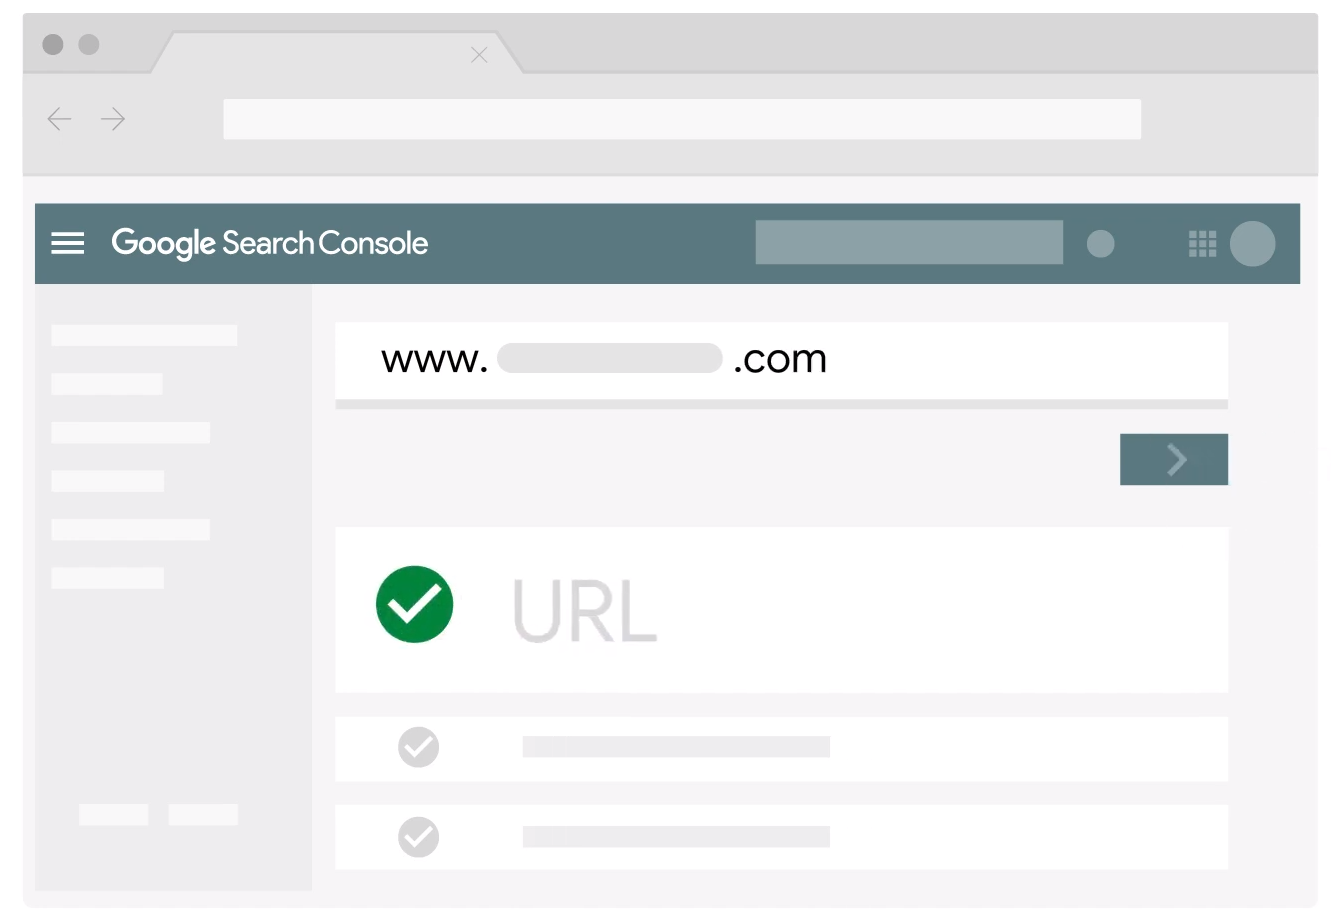 Google Search Console: URL Inspection Tool